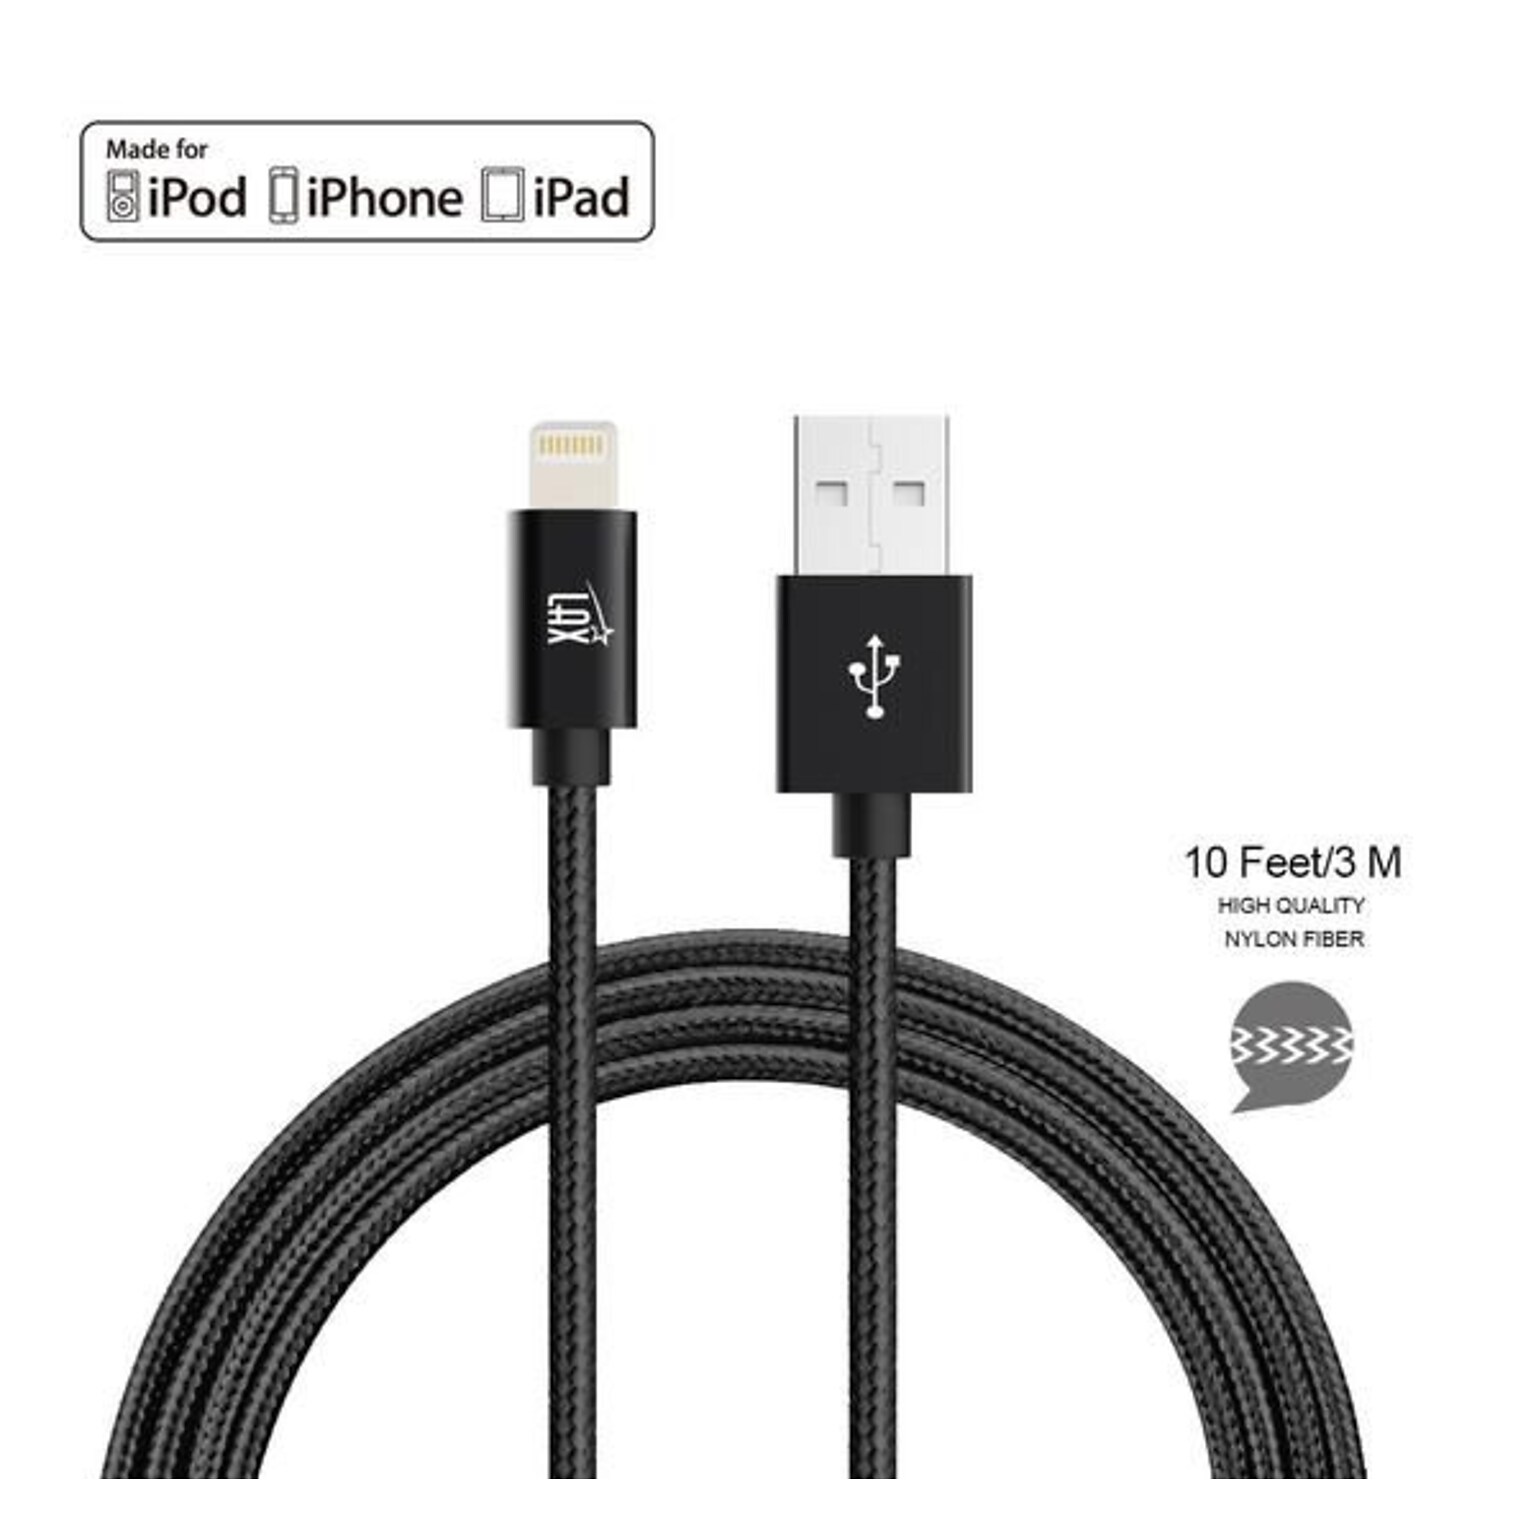 Apple Certified Durable Lightning Cable for iPhone, iPad, 10ft Black (LGHTMFI10FT-BLK)